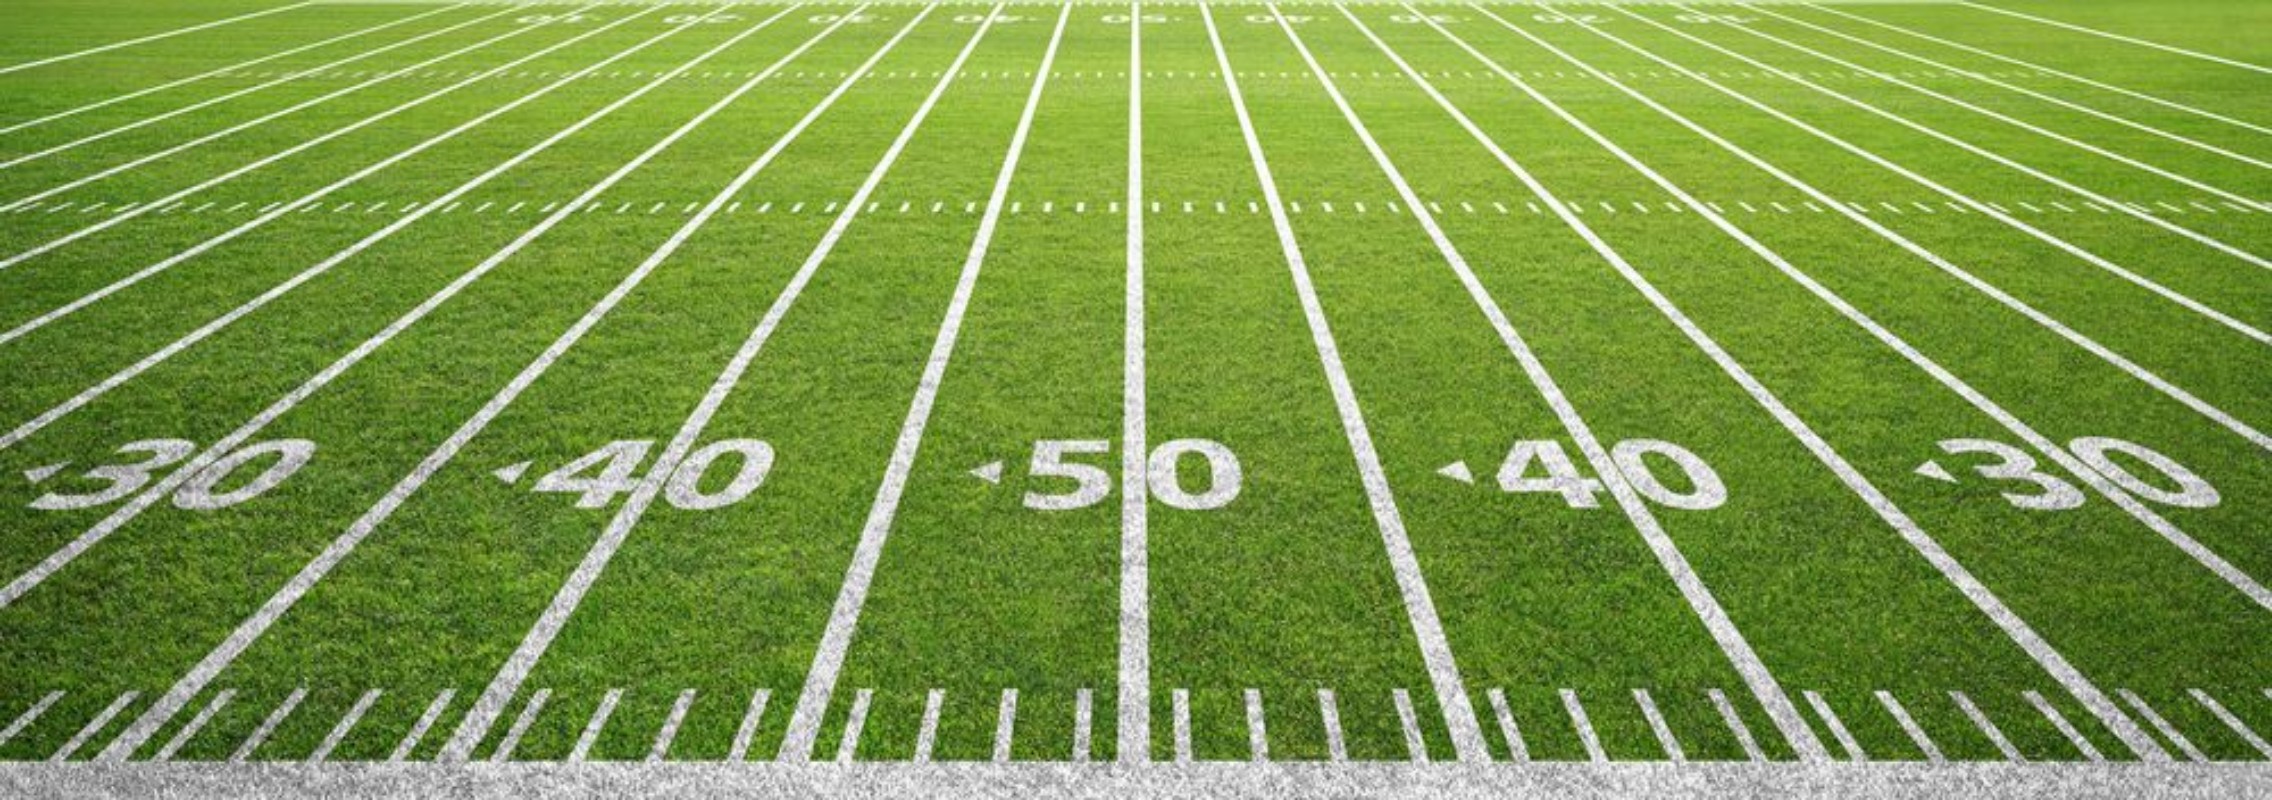 Picture of American Football Field